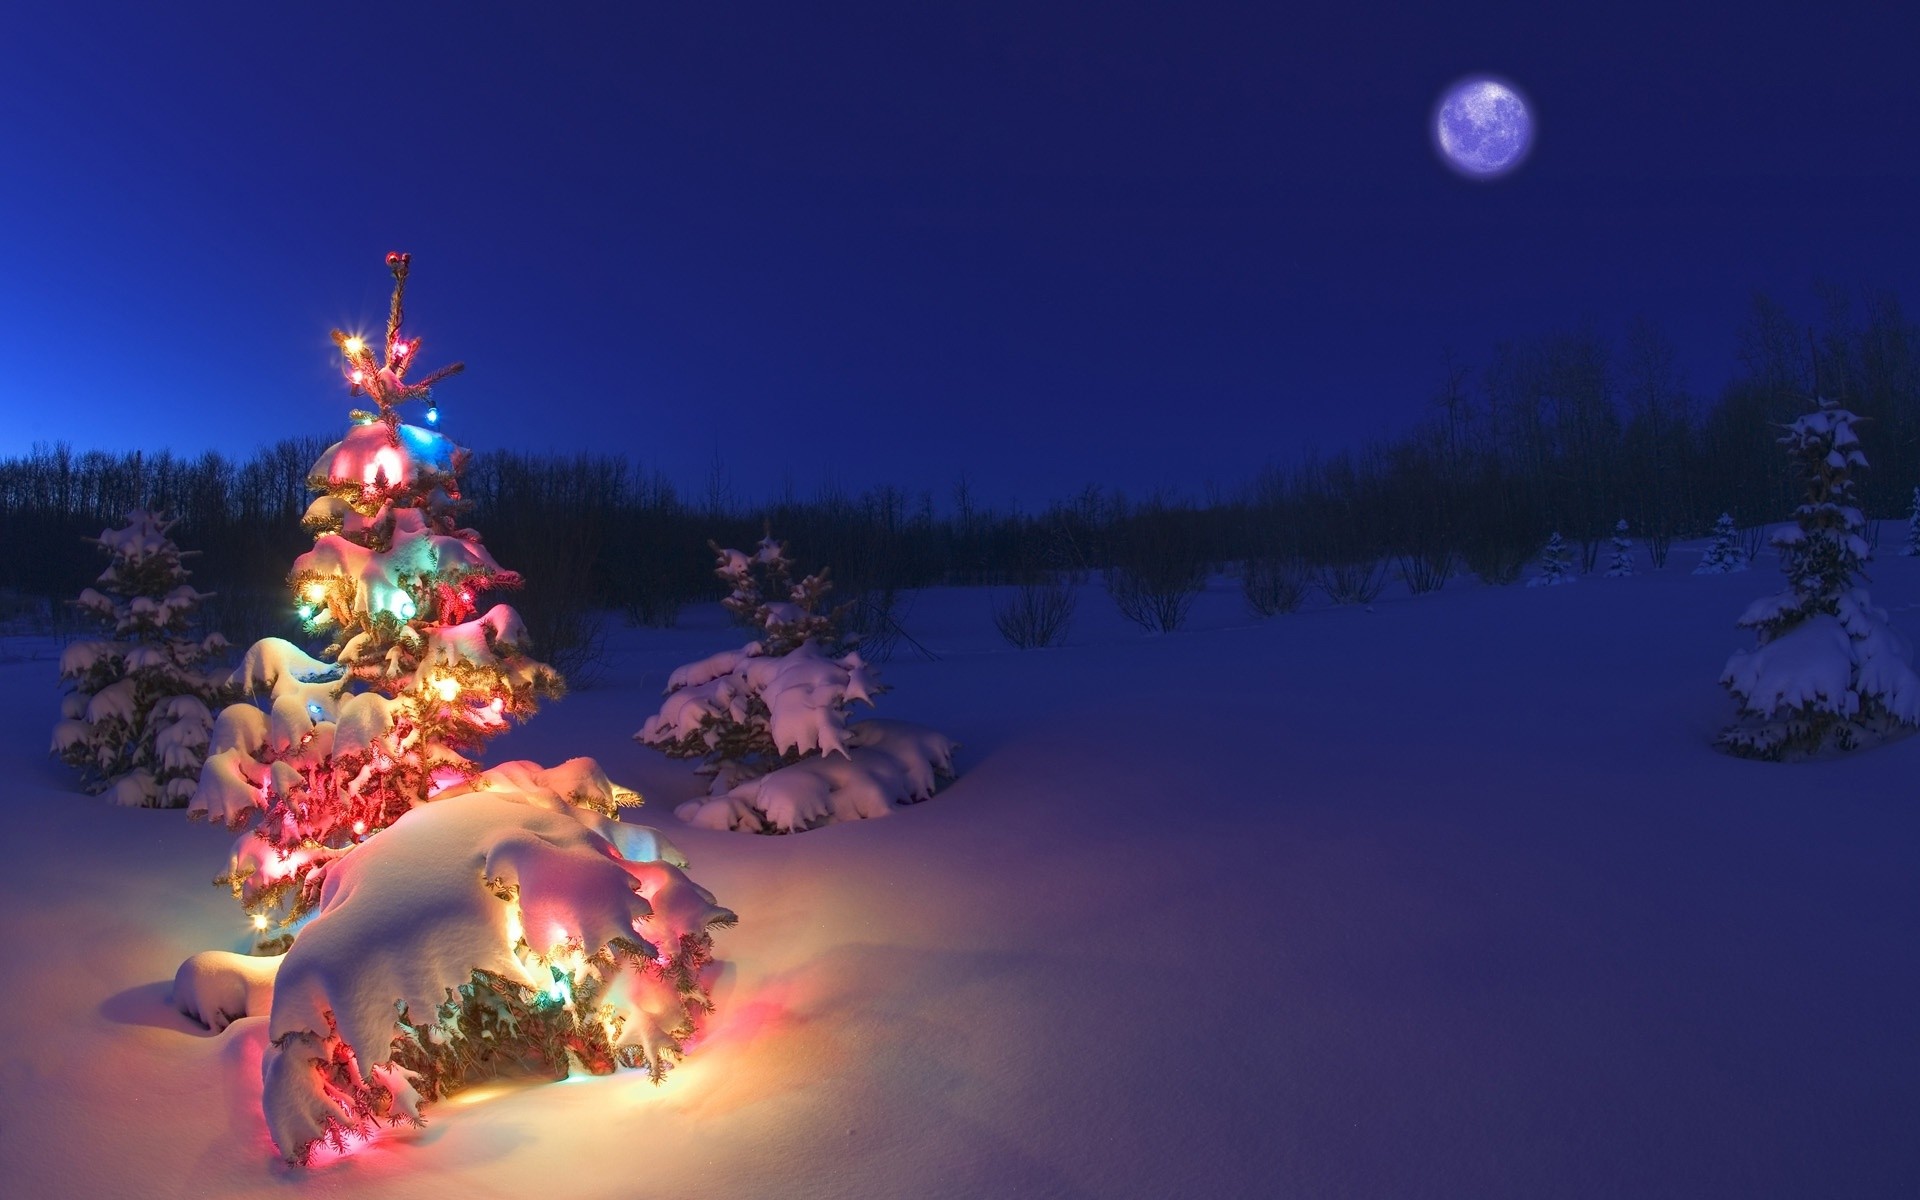 1920x1200 Christmas Lights Decorations Wallpaper Image Download Tree Light In Snow Hd  Search More High. houses ...